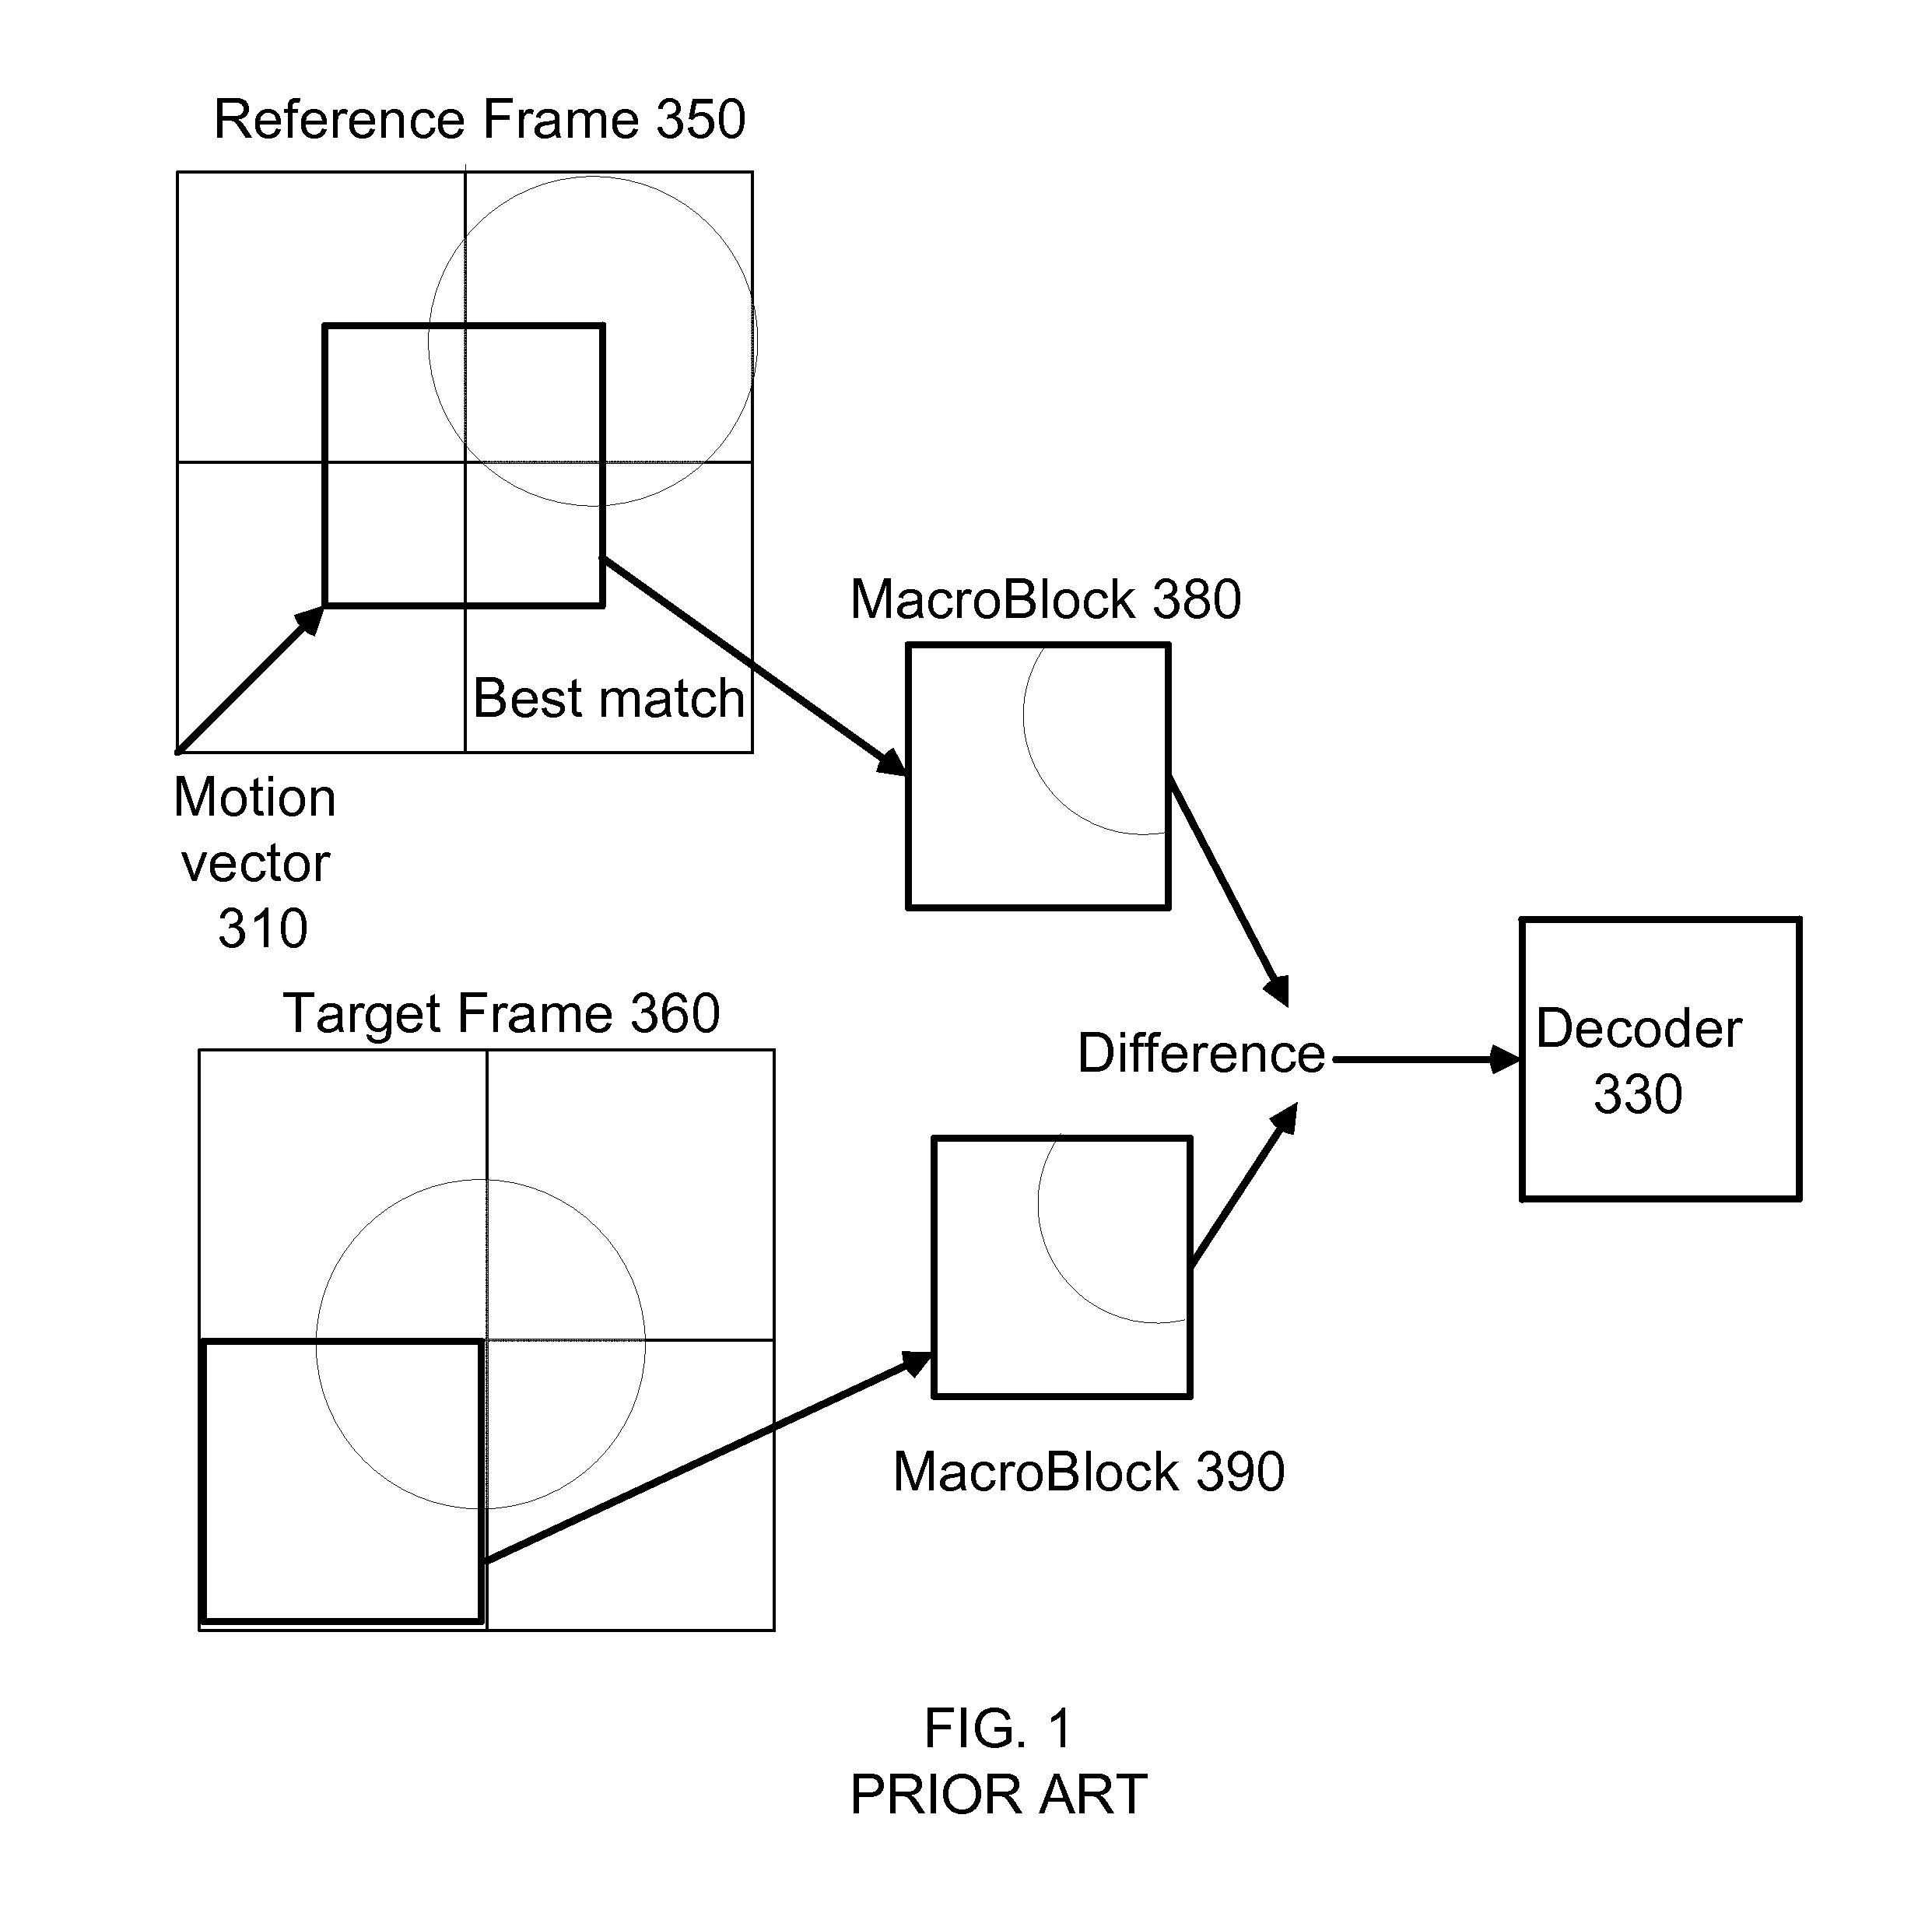 Apparatus and method for enhancing motion estimation based on user input